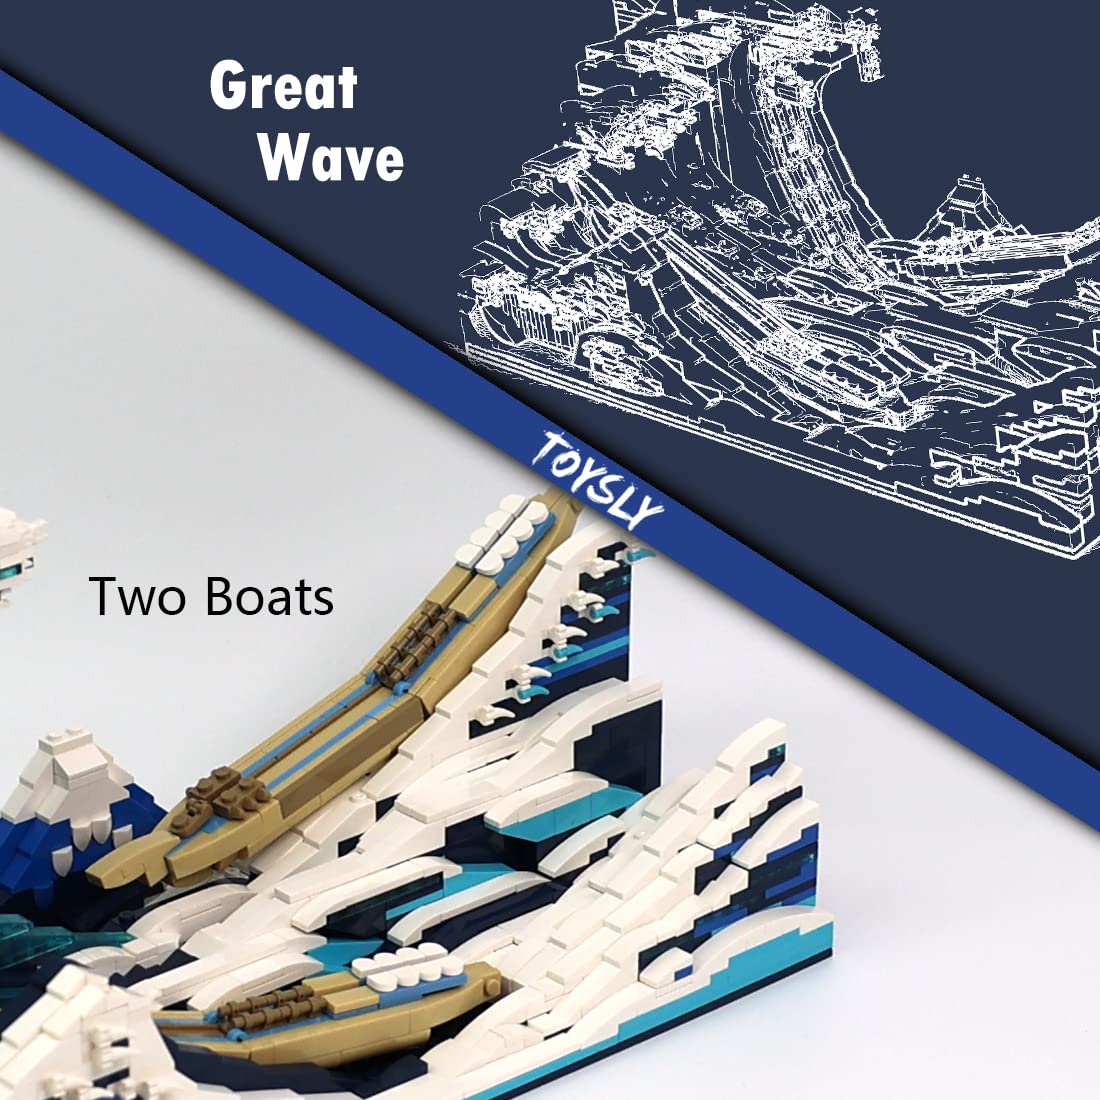 TOYSLY Great Wave Building Block Set for Adults Men Women, Japanese Art Display Model for Home or Office, Educational DIY Assembly Construction Toy, Gift for 8-12 Years Old Boys, New 2023(1830 Pcs)